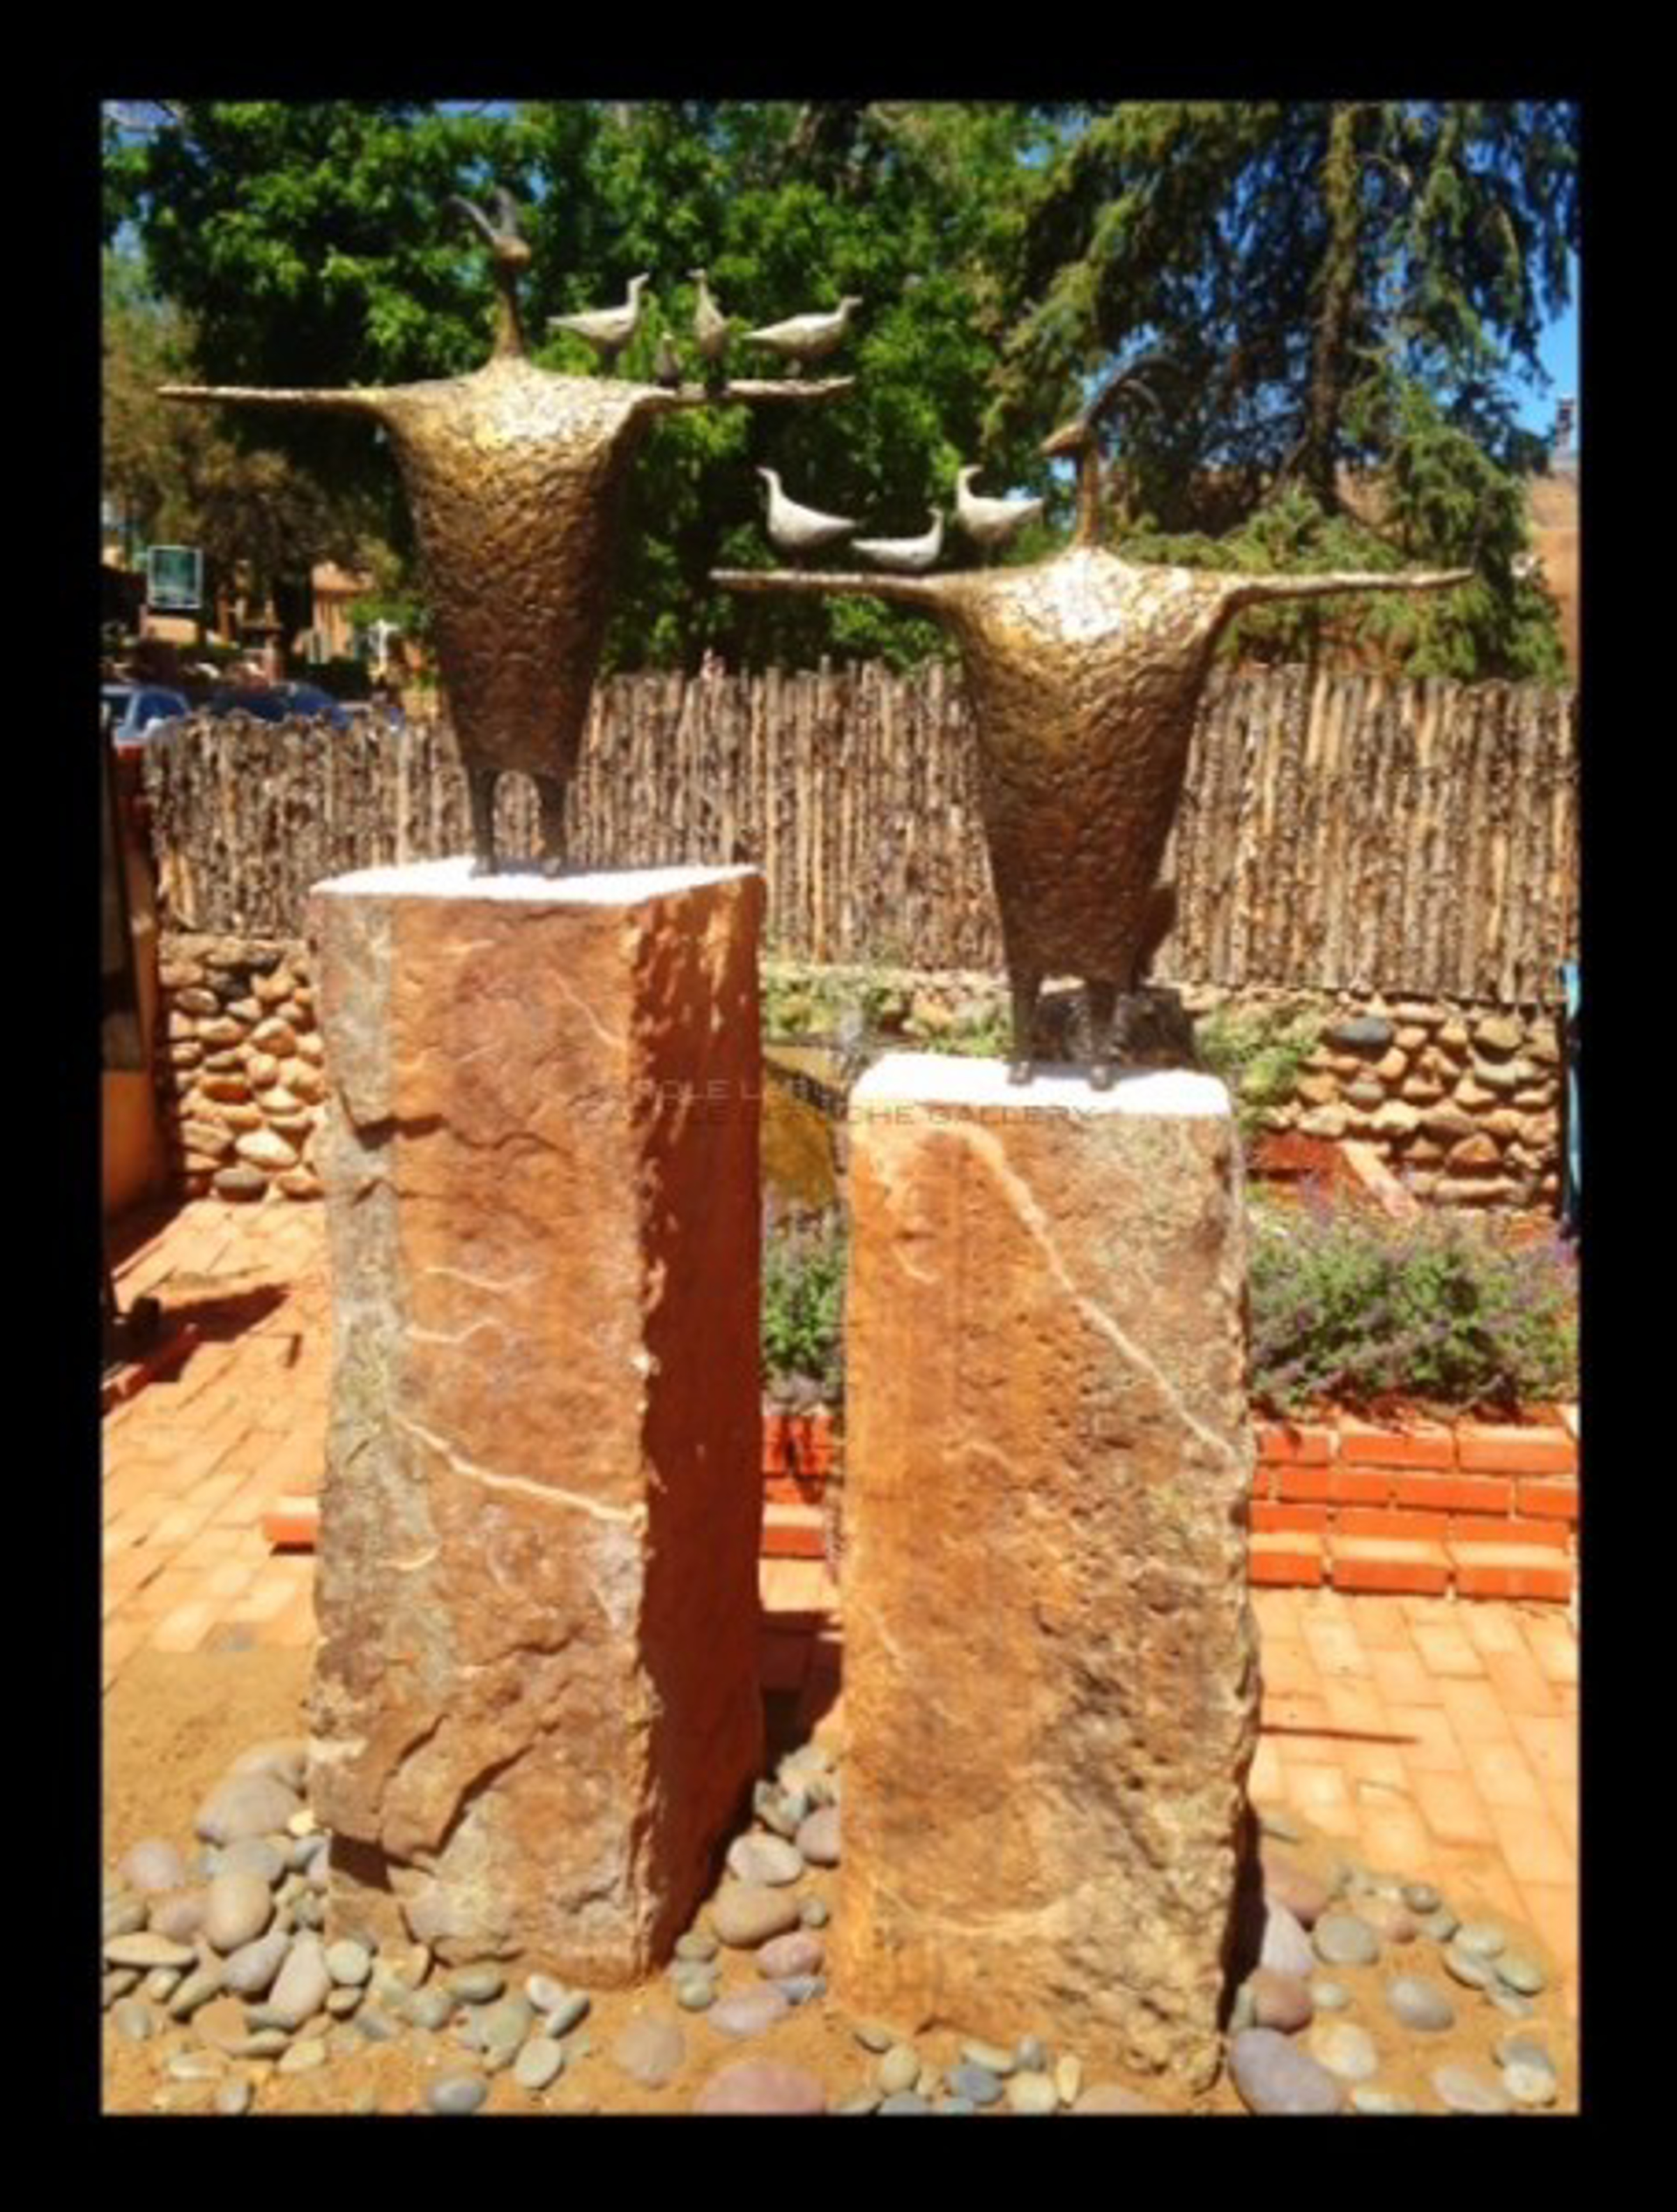 PROTECTORS OF THE MIGRATION Sculptures 34"x33"x10" $7800 each Two Rock Pedestals $7500 OR Two Sculptures with Two Rock Pedestals $22,800. May be purchased separately or together. by Jill Shwaiko